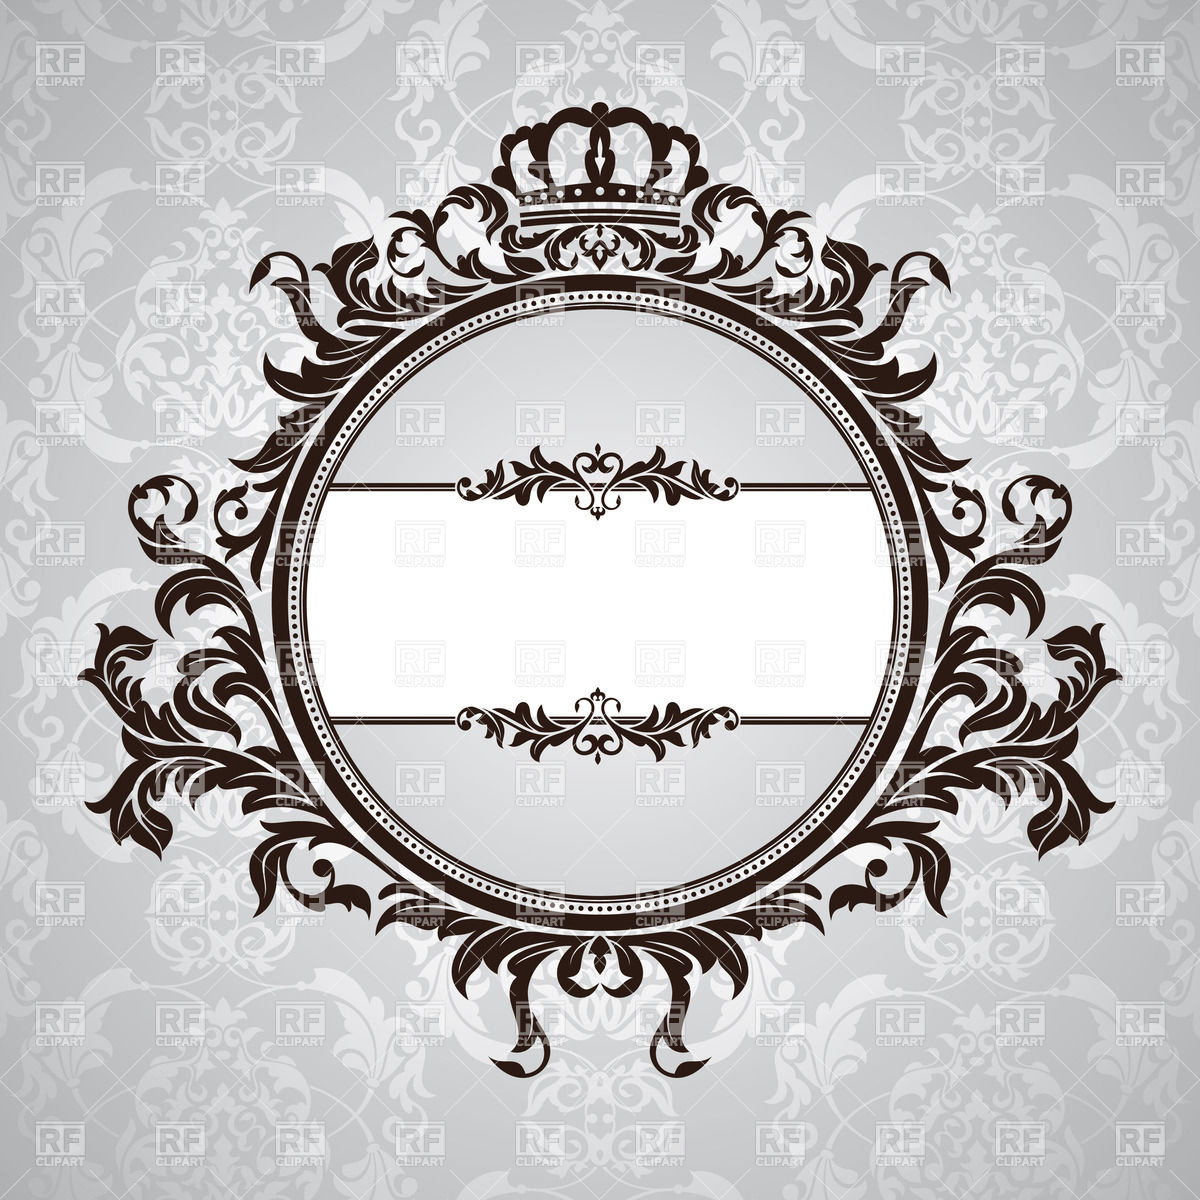 Crown 37724 Borders And Frames Download Royalty Free Vector Clipart